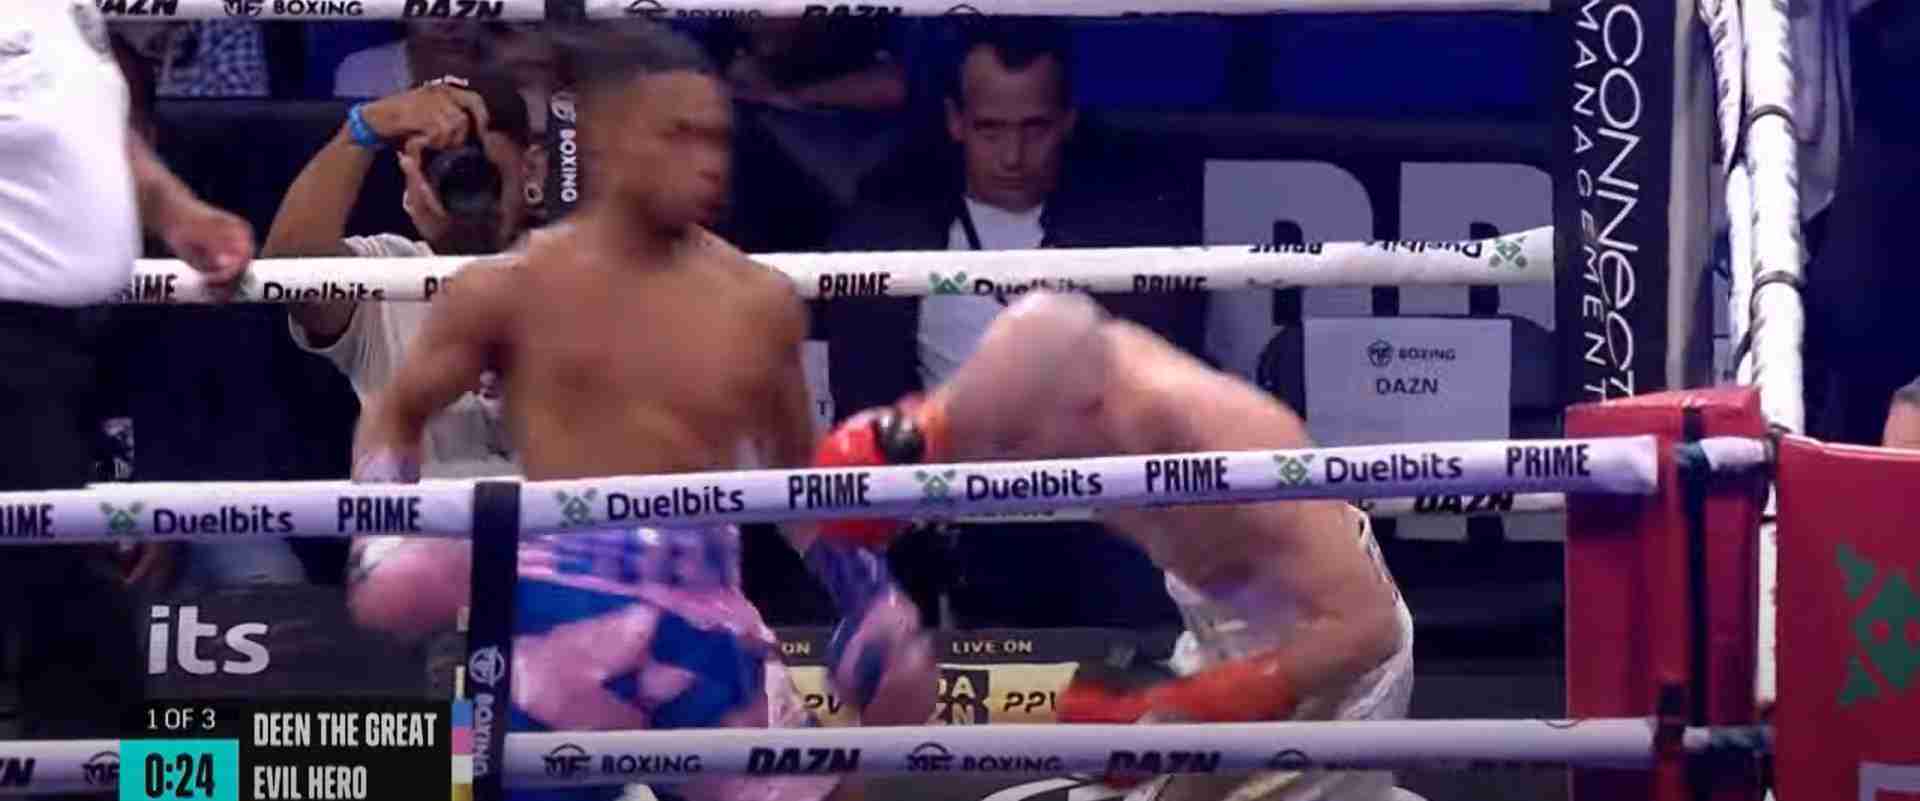 Boxer Produces Brutal Knockout Fighting Twice In 1 Night